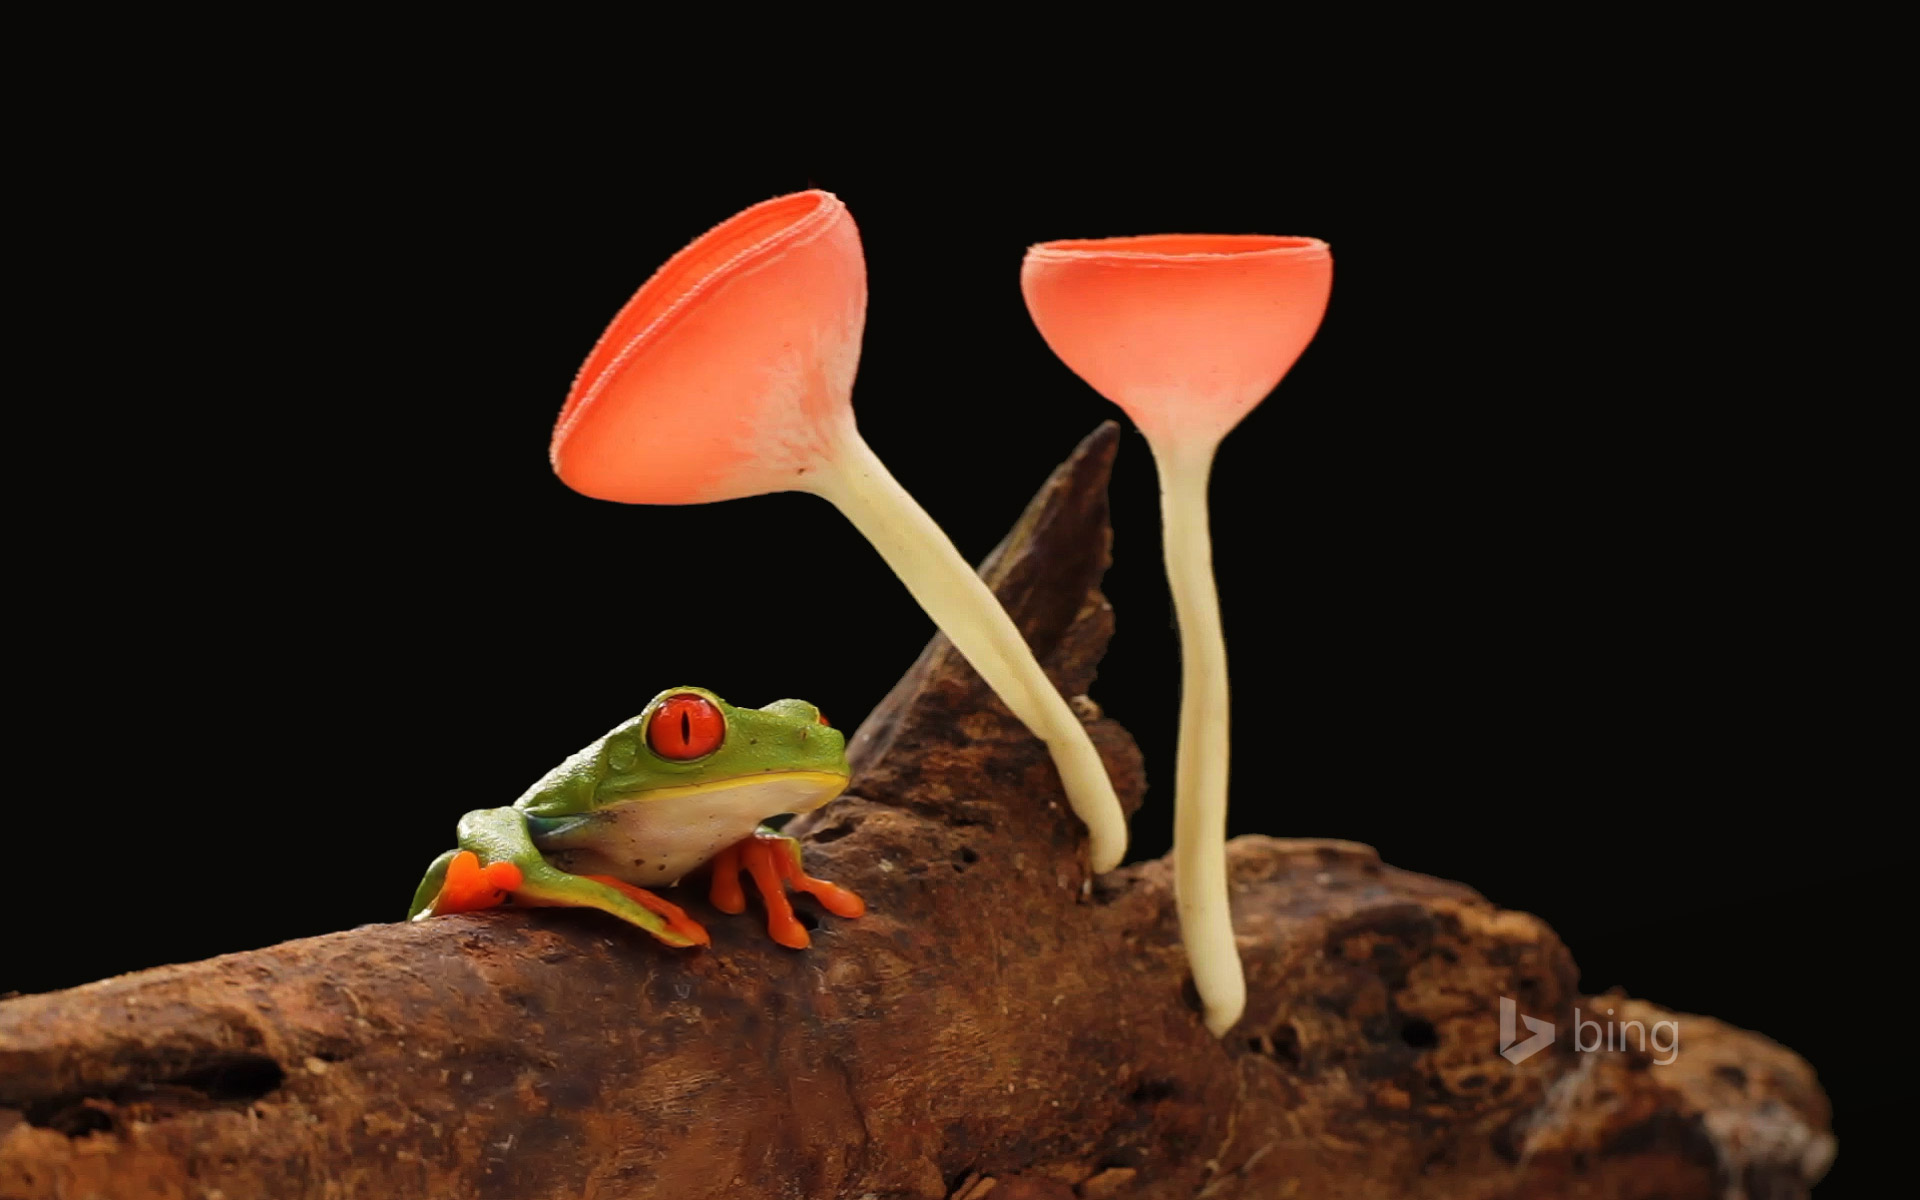 My favorite Bing background this wee a red eyed frog and mushrooms